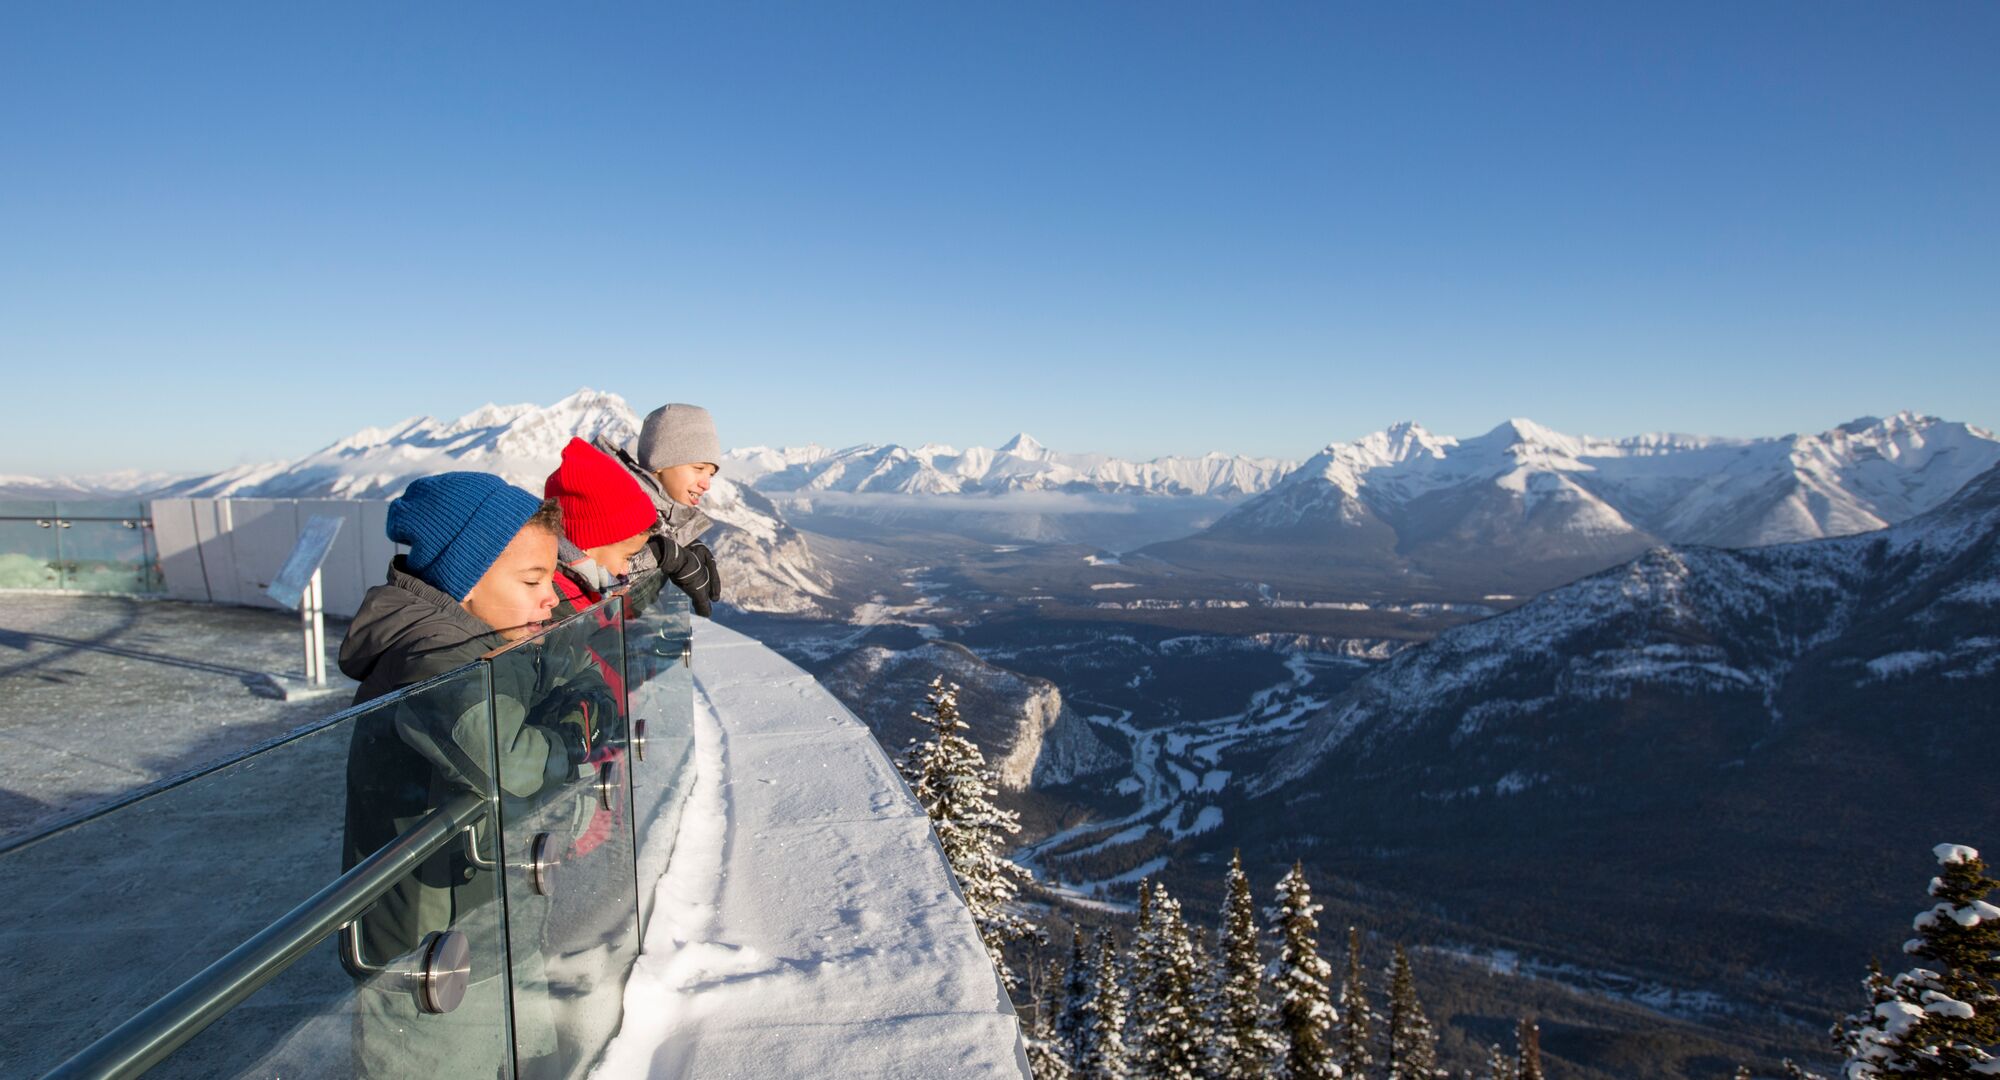 Three kids taking in the views of the mountains from the viewing deck at the top of the Banff Gondola